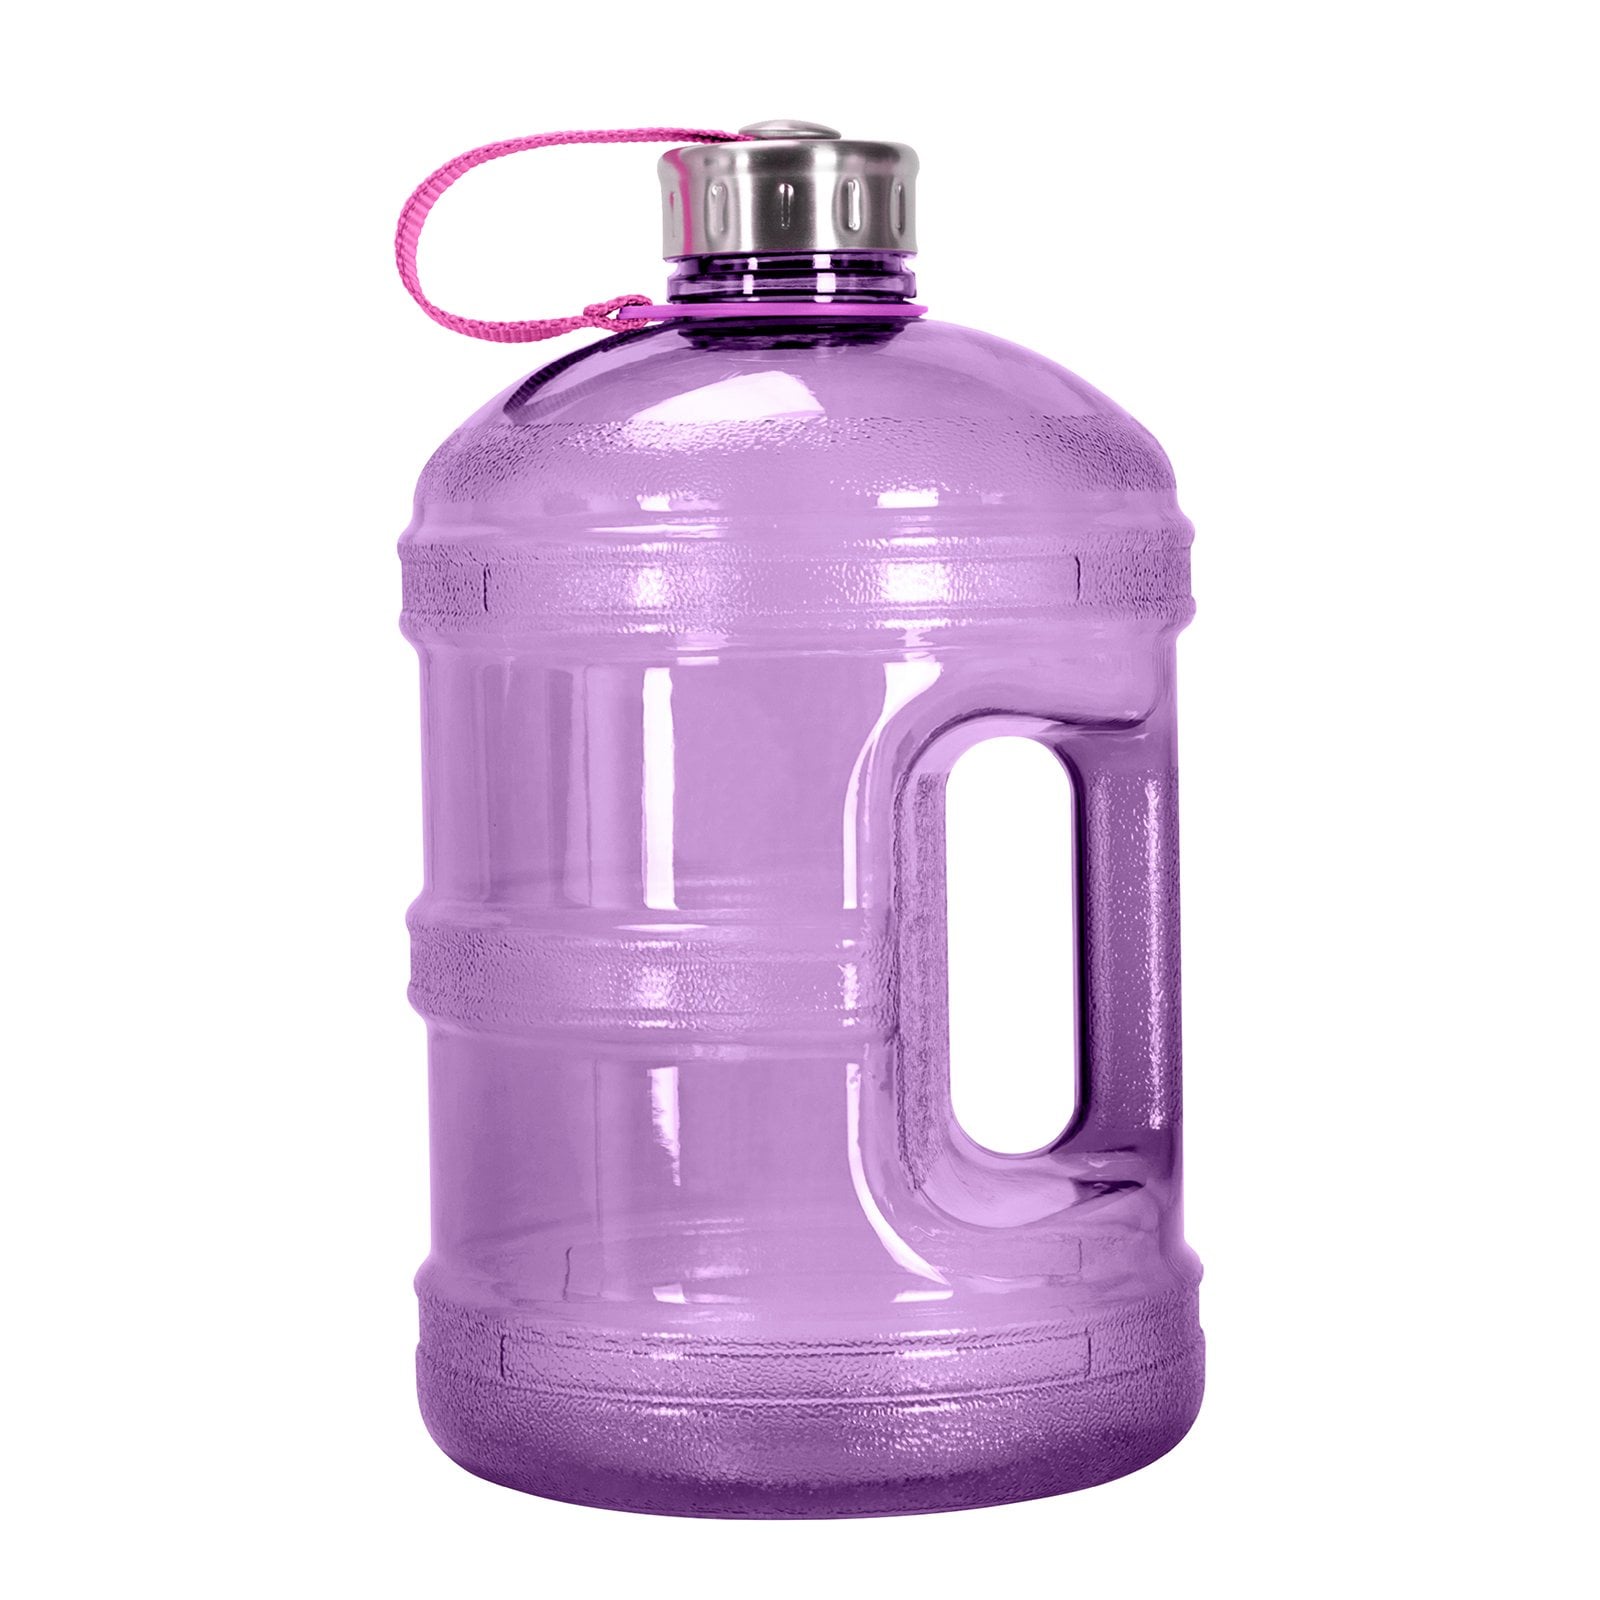 15 of the Best Gallon-Size Water Bottles